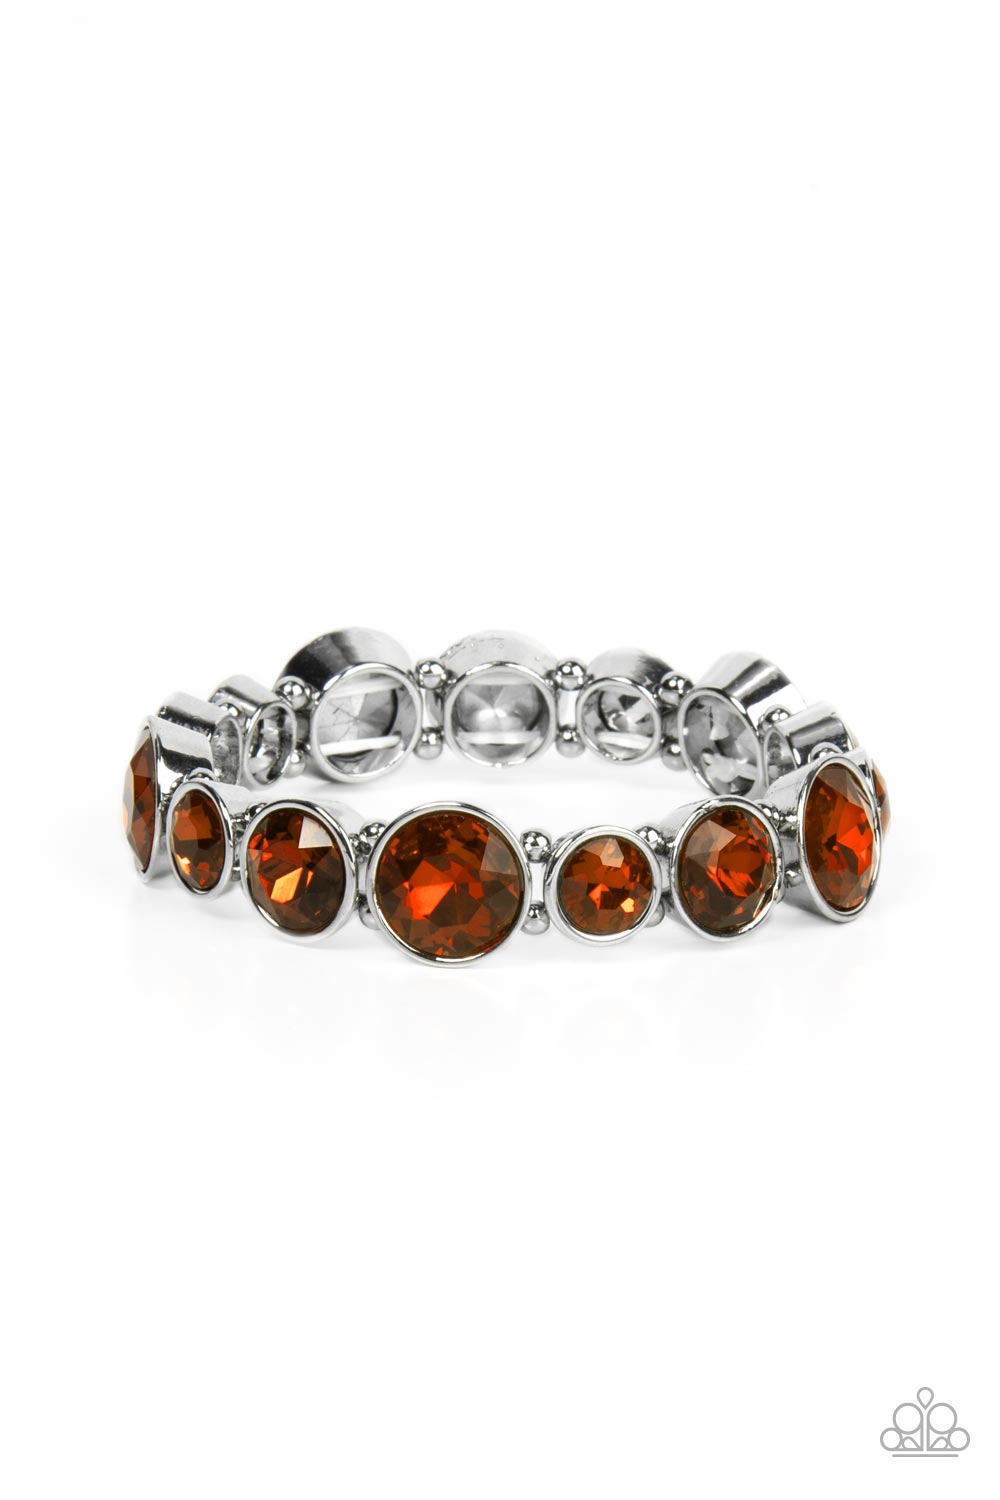 Paparazzi Twinkling Tease - Brown Bracelet - A Finishing Touch Jewelry